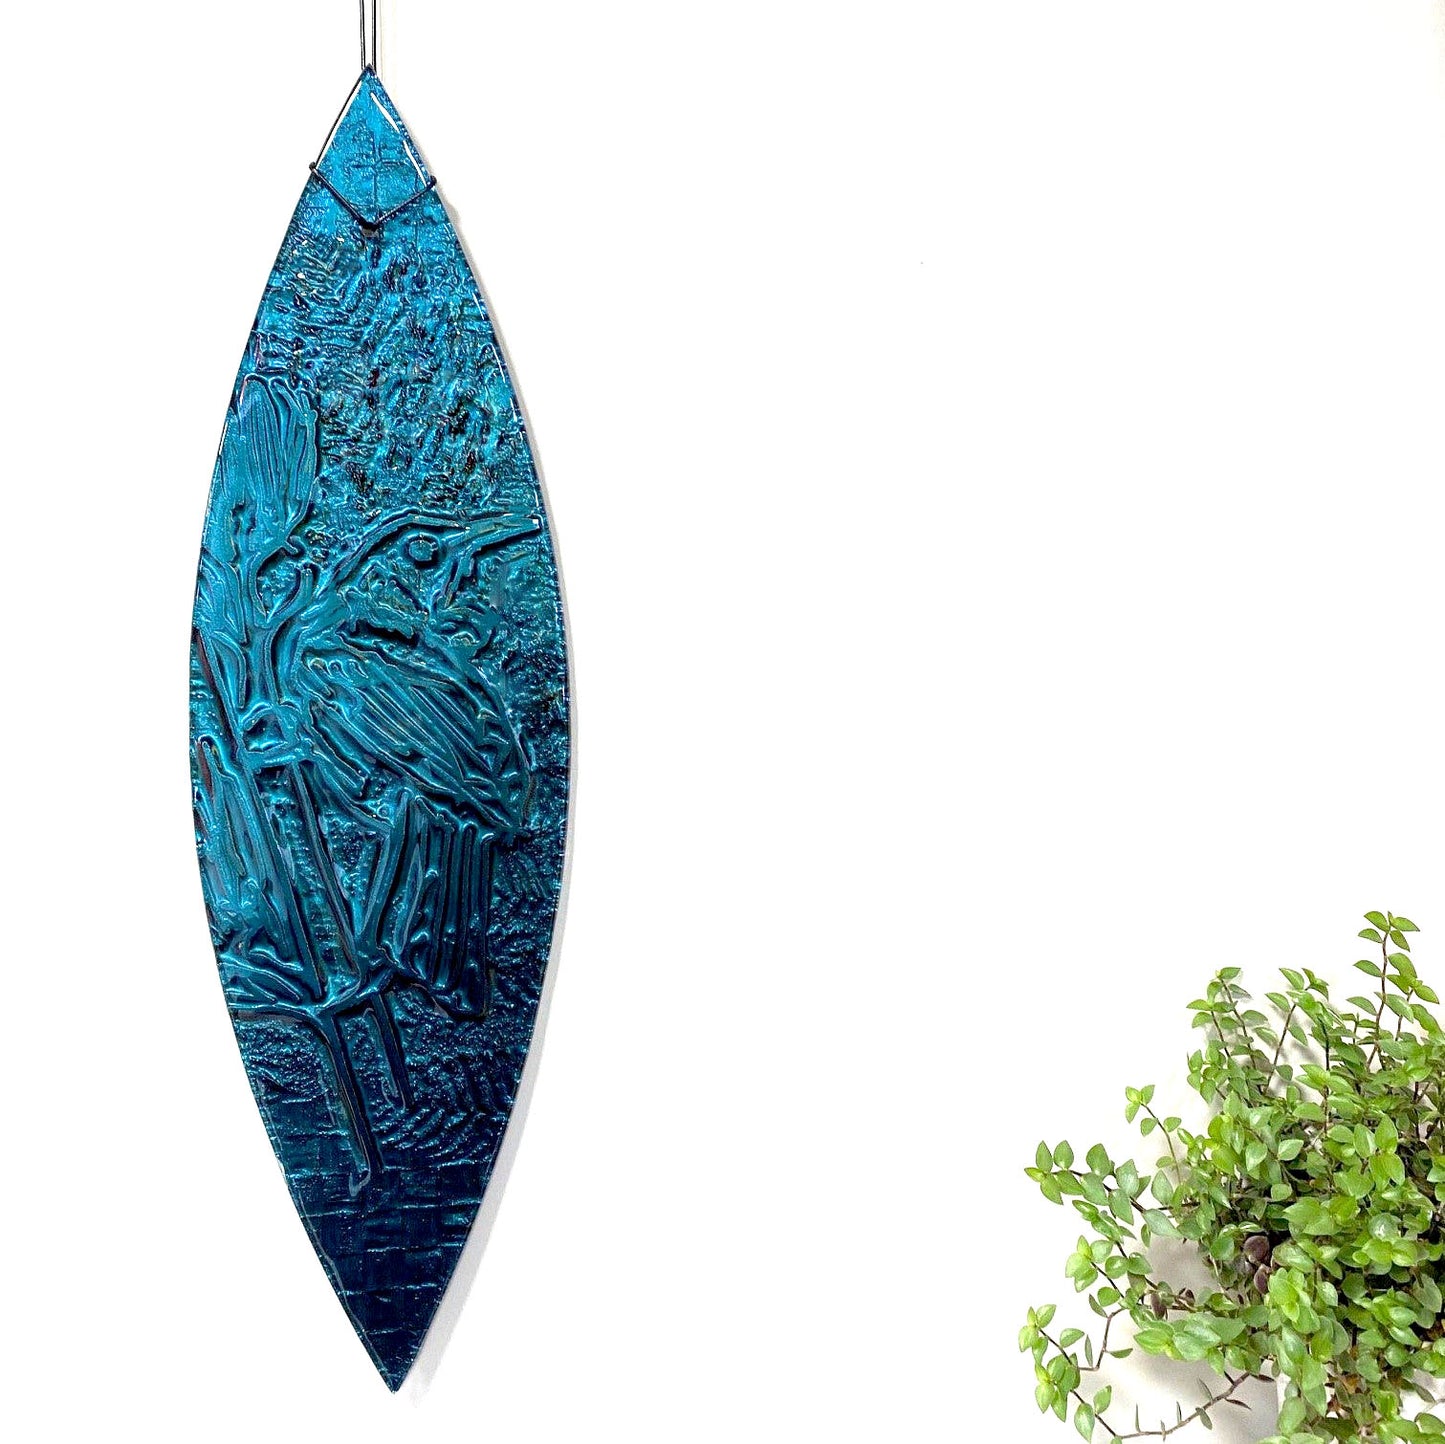 Wall Hanging - Large - Tui or Fantail